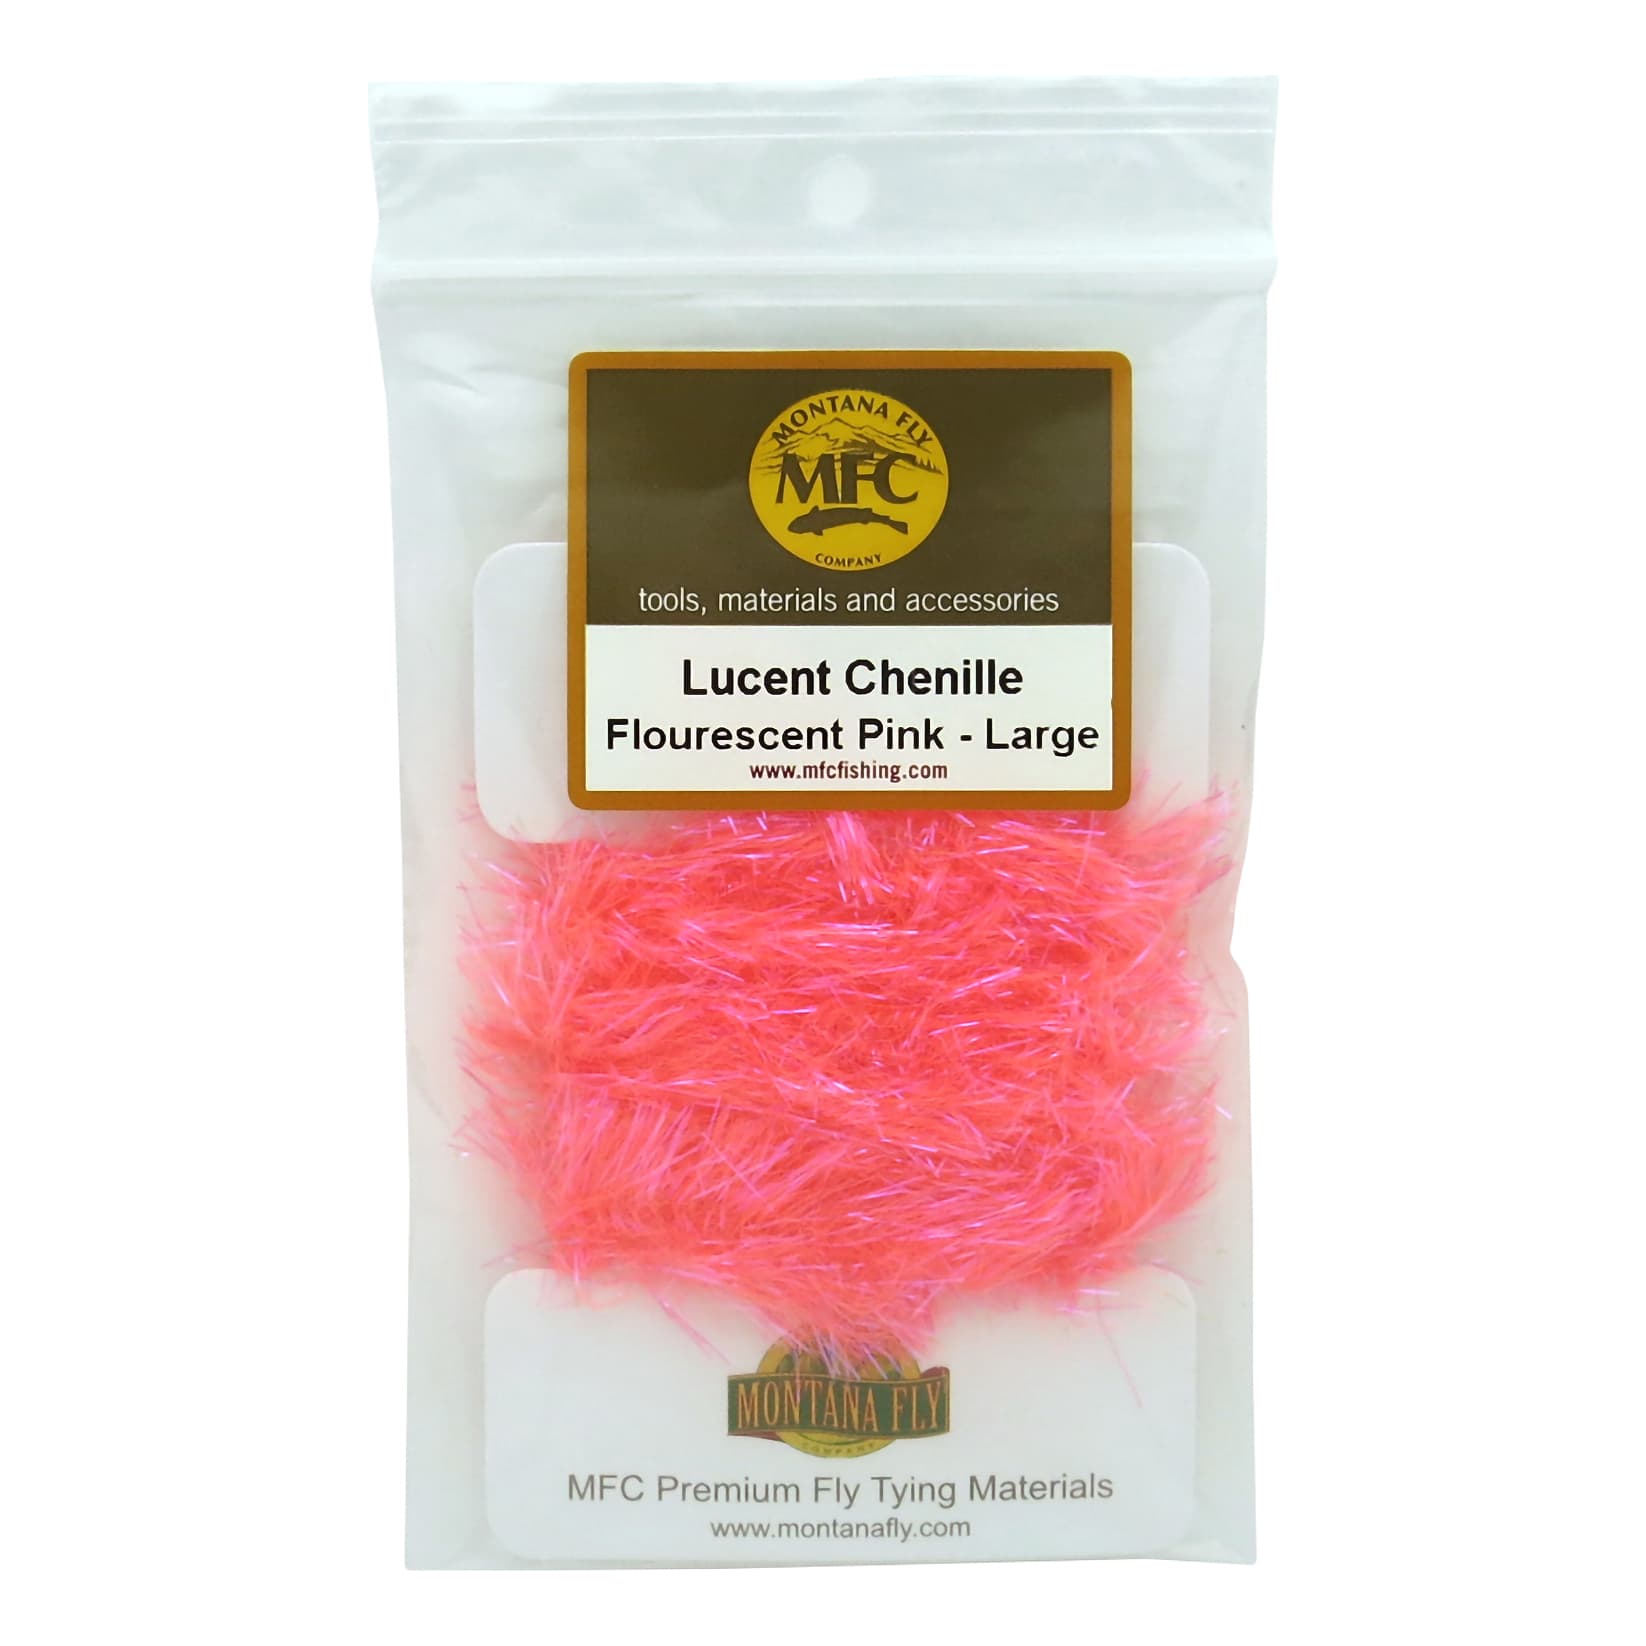 Montana Fly Company Lucent Chenille - Large - Fluorescent Pink